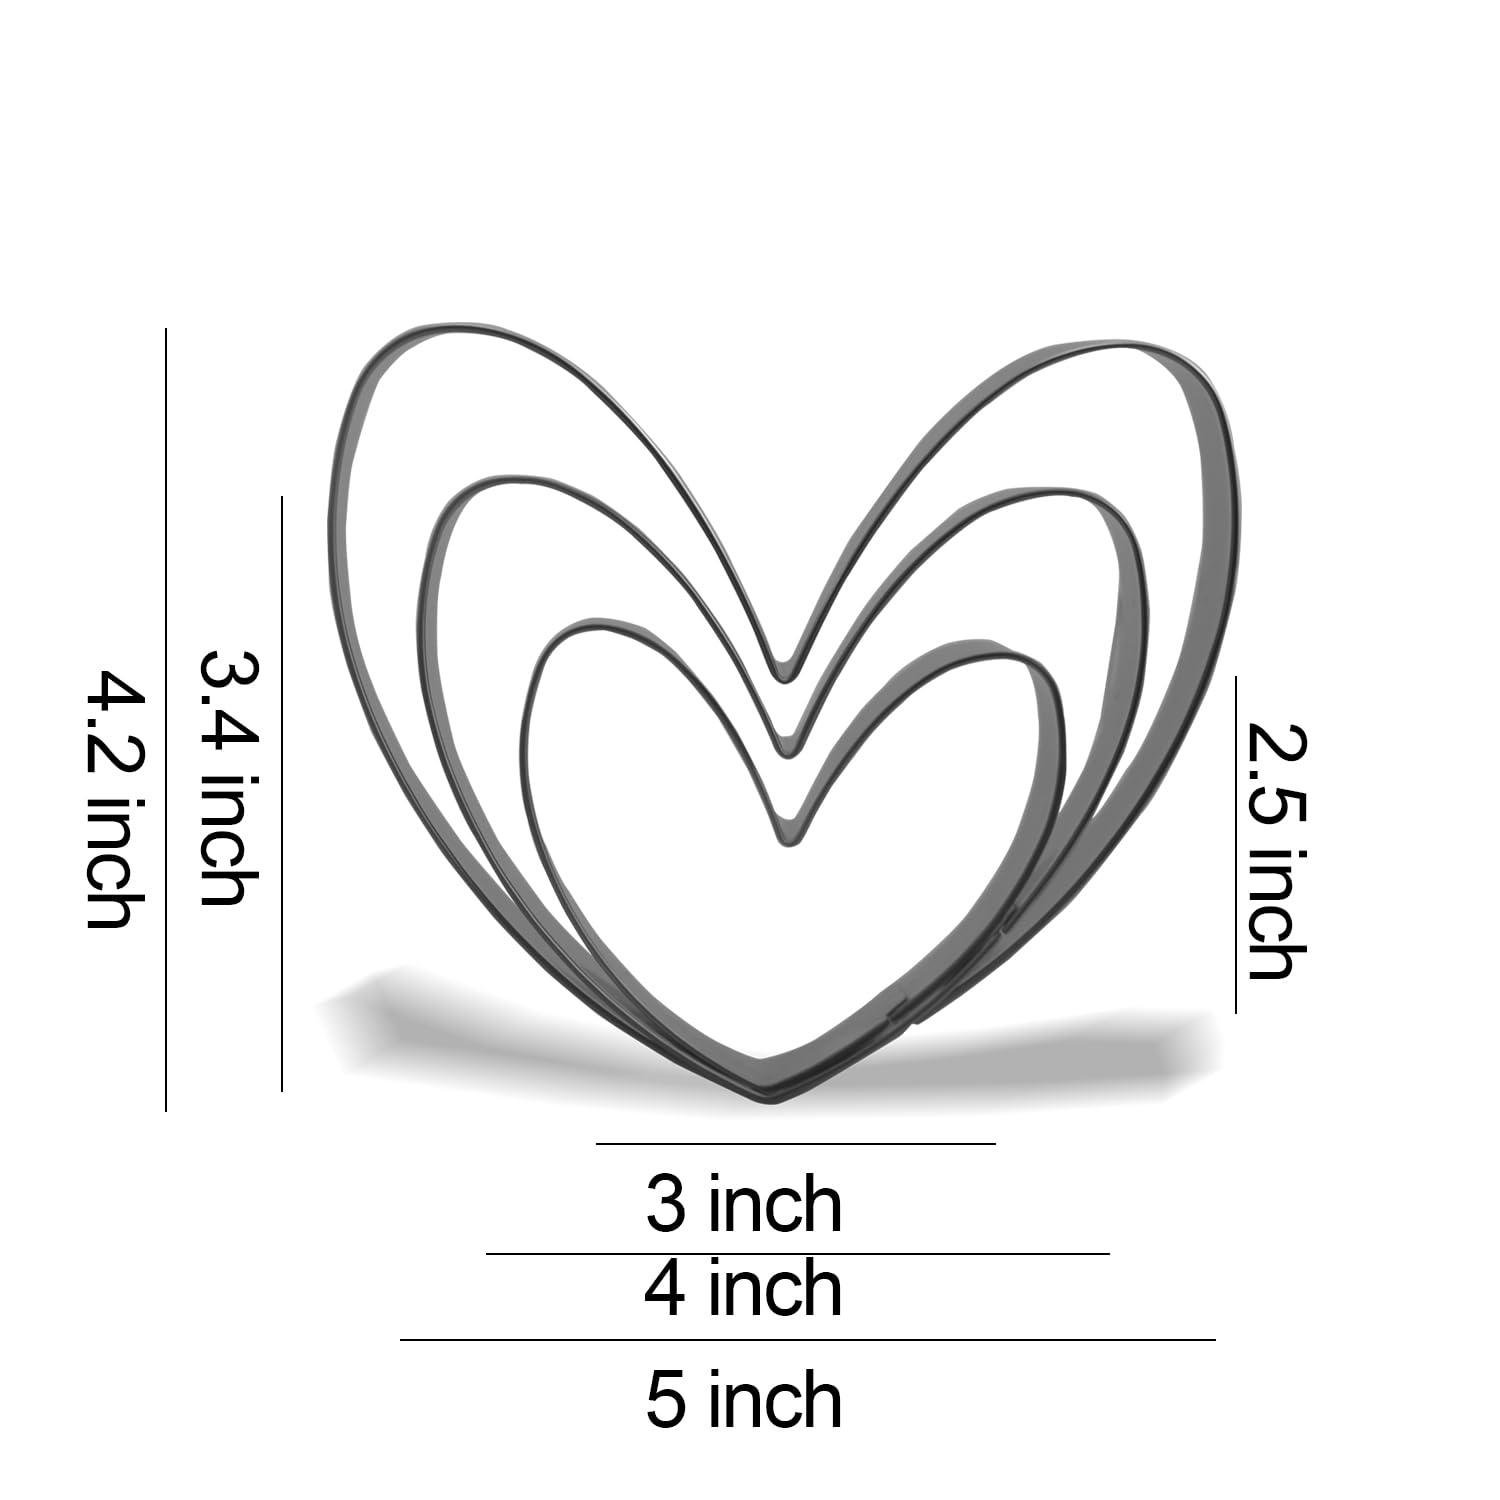 Keewah Heart Cookie Cutter Set - 5”,4”,3” - 3 Piece - Stainless Steel - CookCave